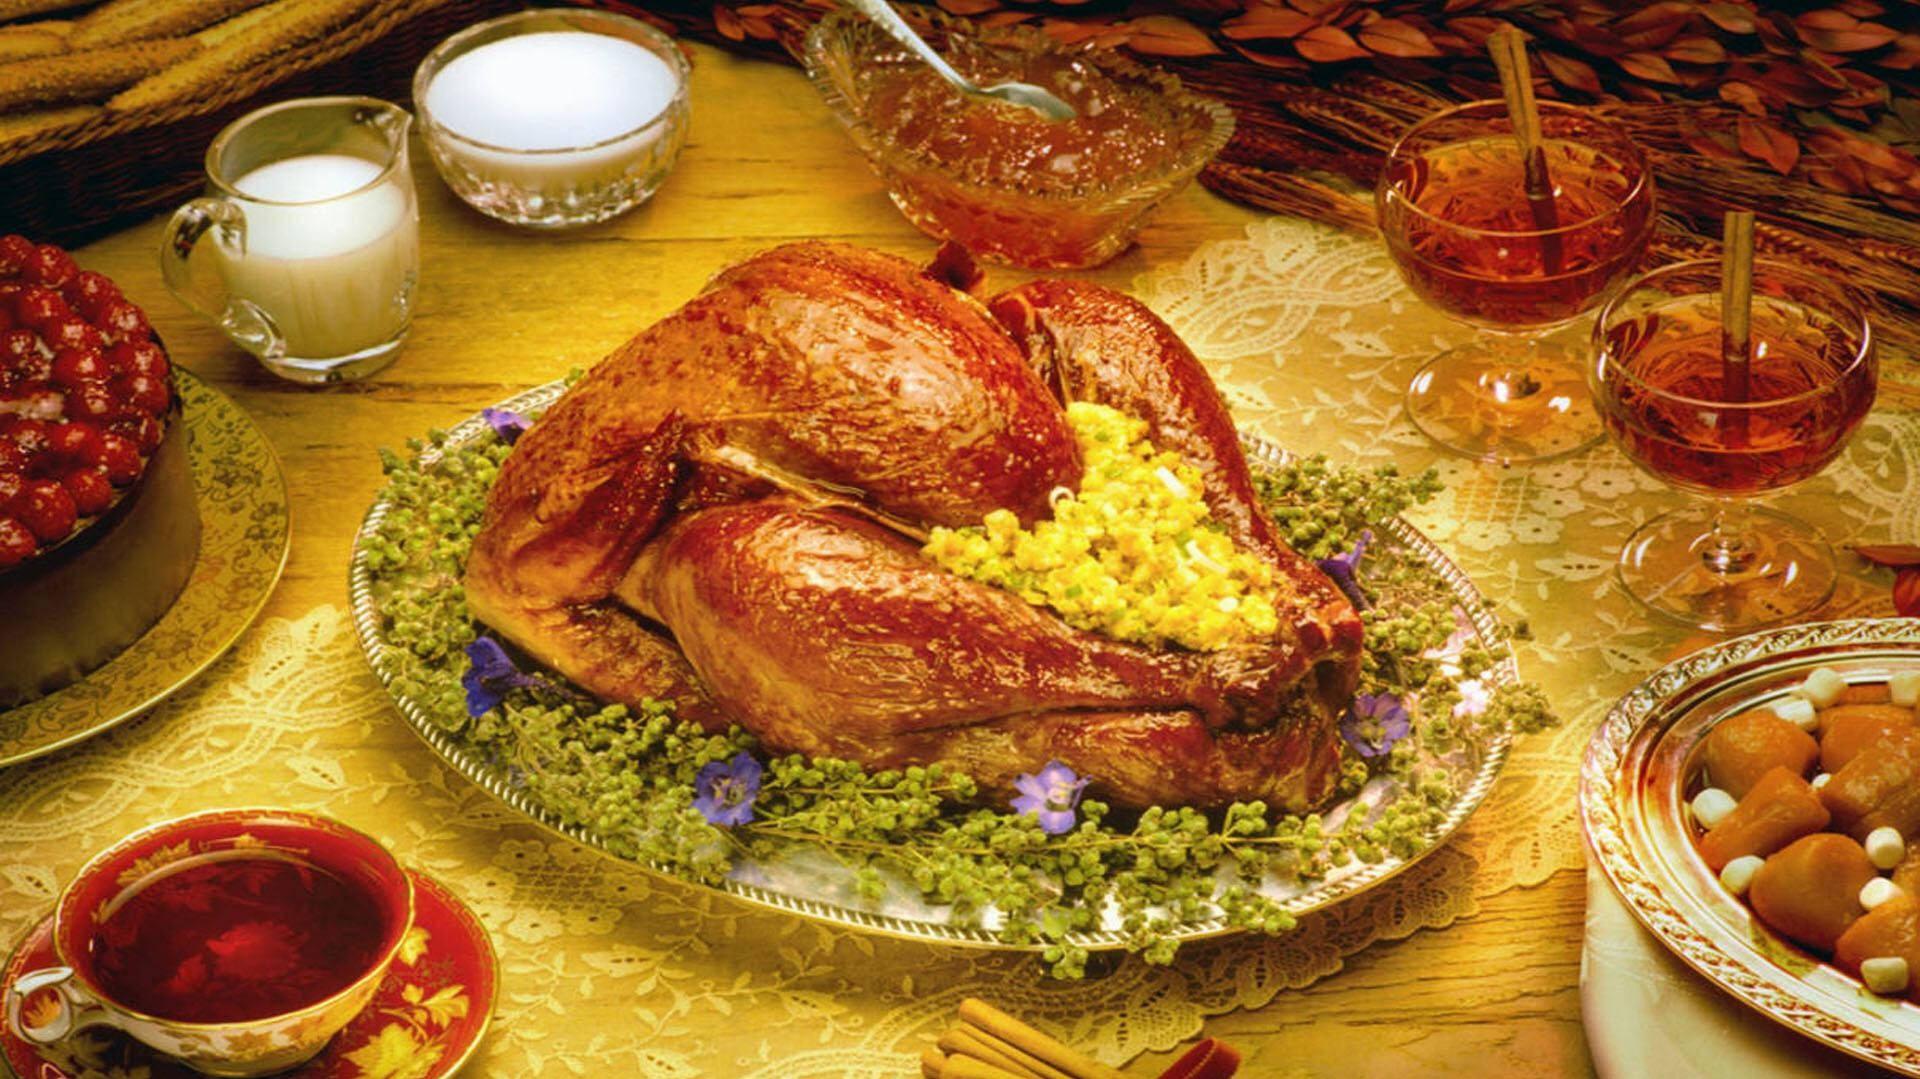 Deliciously Roasted Turkey For A Festive Dinner Wallpaper